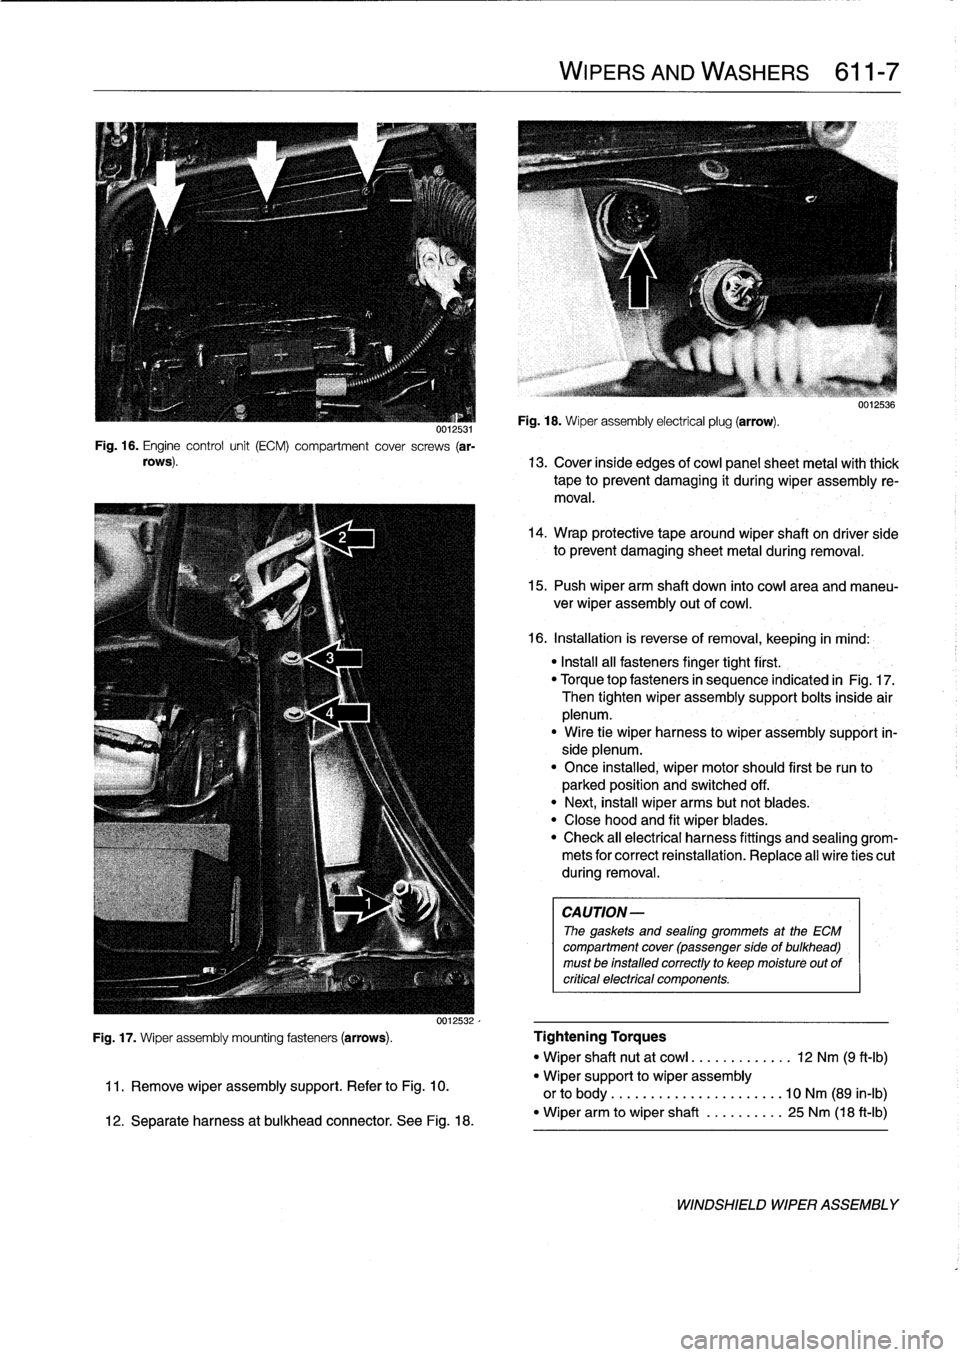 BMW 328i 1997 E36 Workshop Manual 
0012531Fig
.
16
.
Engine
control
unit
(ECM)
compartment
cover
screws
(ar-
rows)
.

WIPERS
AND
WASHERS

	

611-
7

Fig
.
18
.
Wiper
assembly
electrical
plug
(arrow)
.

uu1zbs6

13
.
Cover
inside
edges